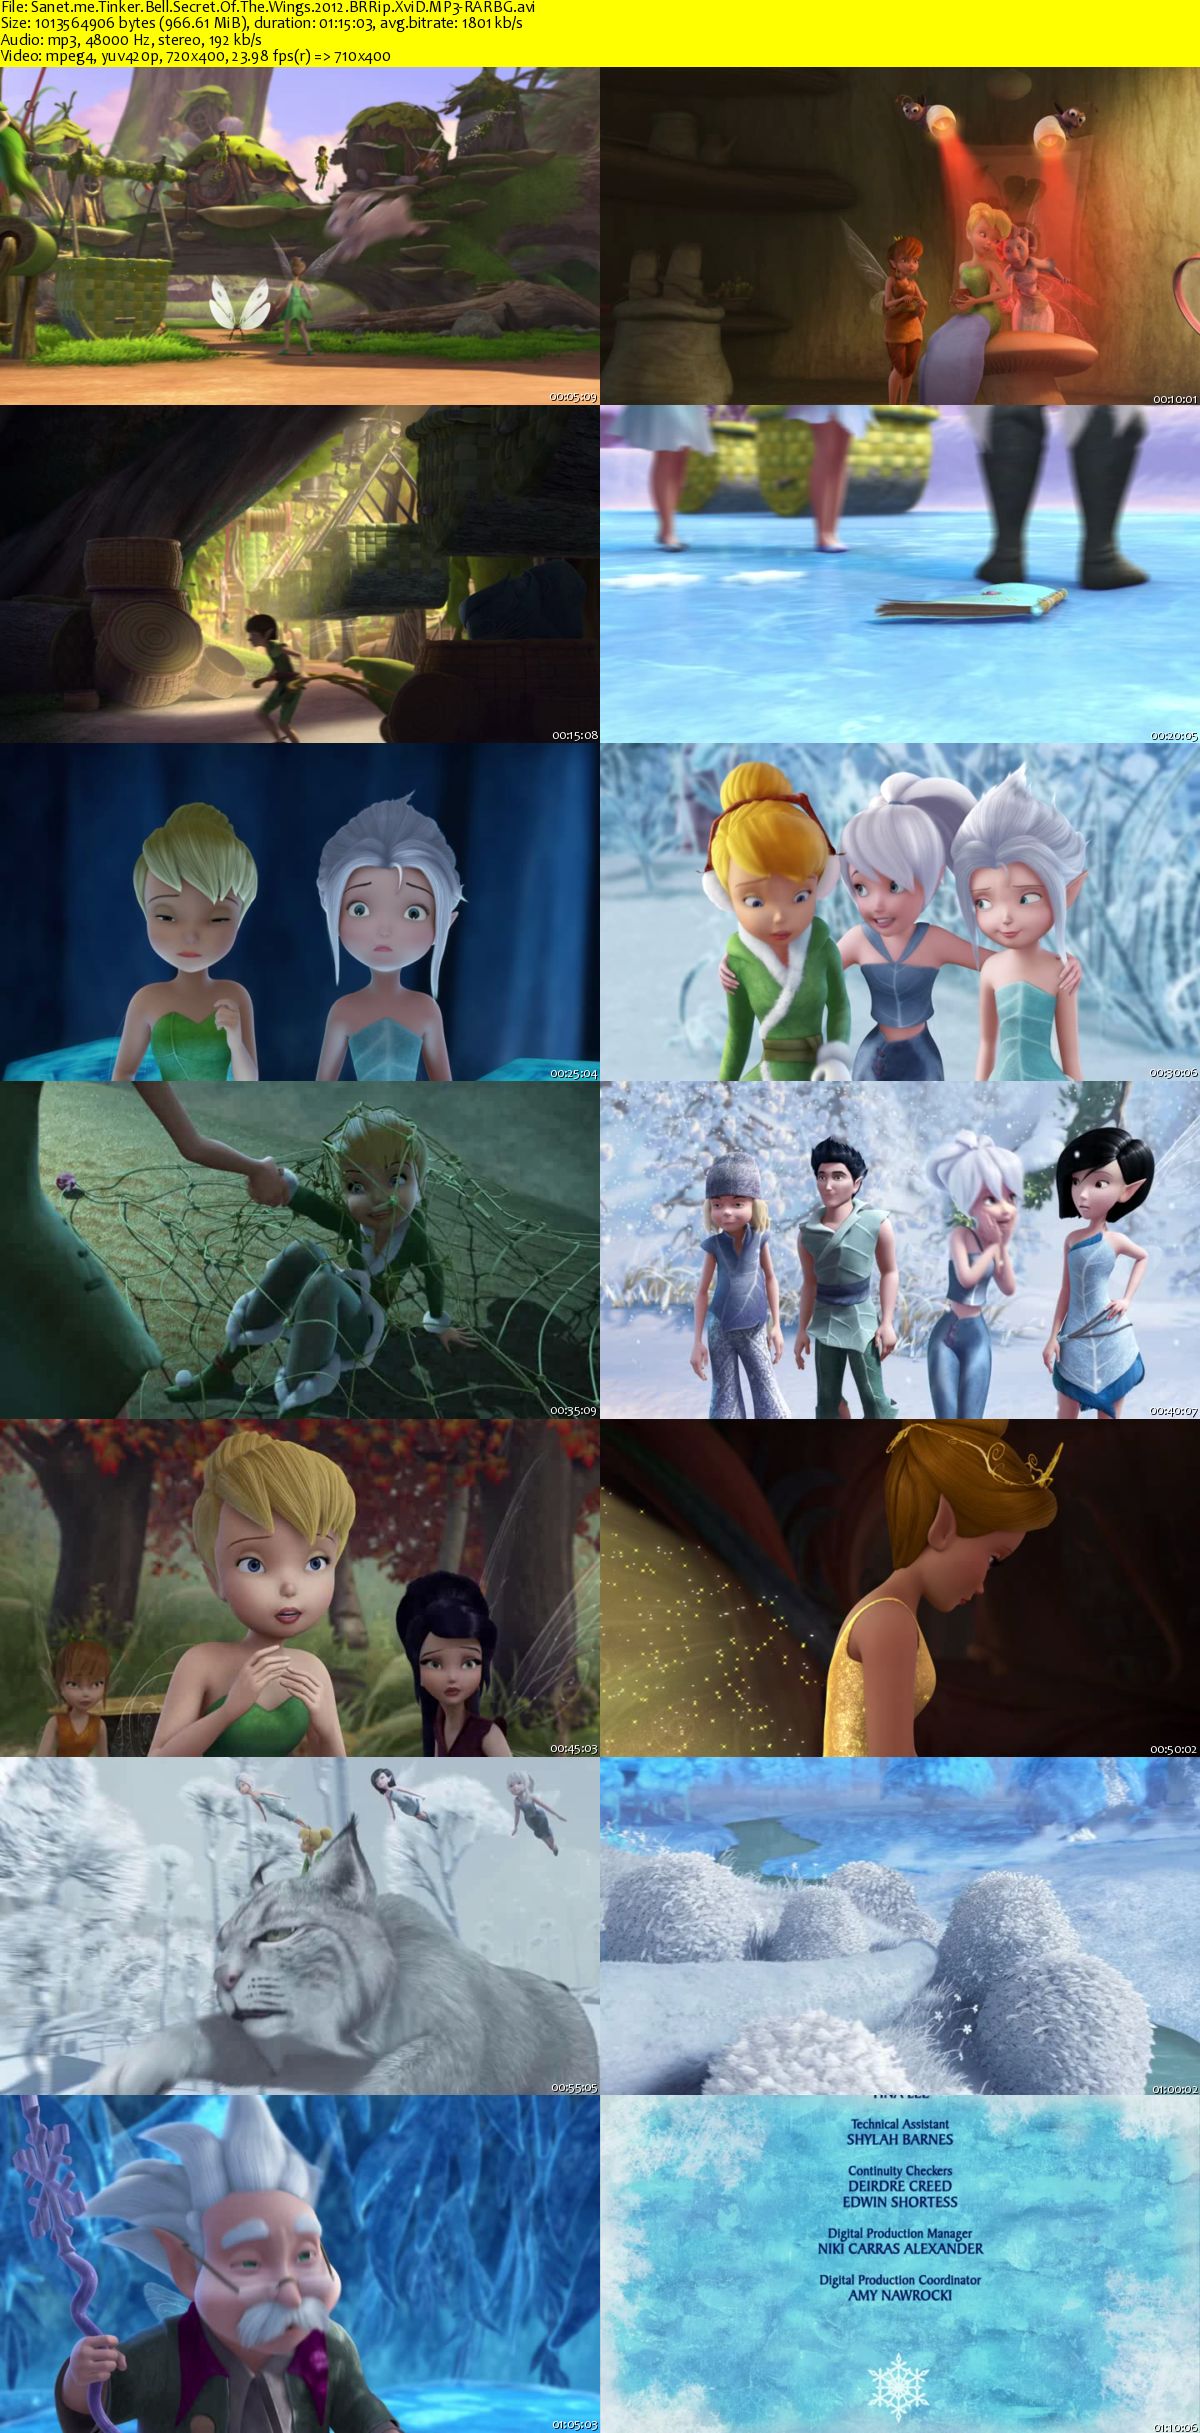 download tinkerbell the secret of the wings